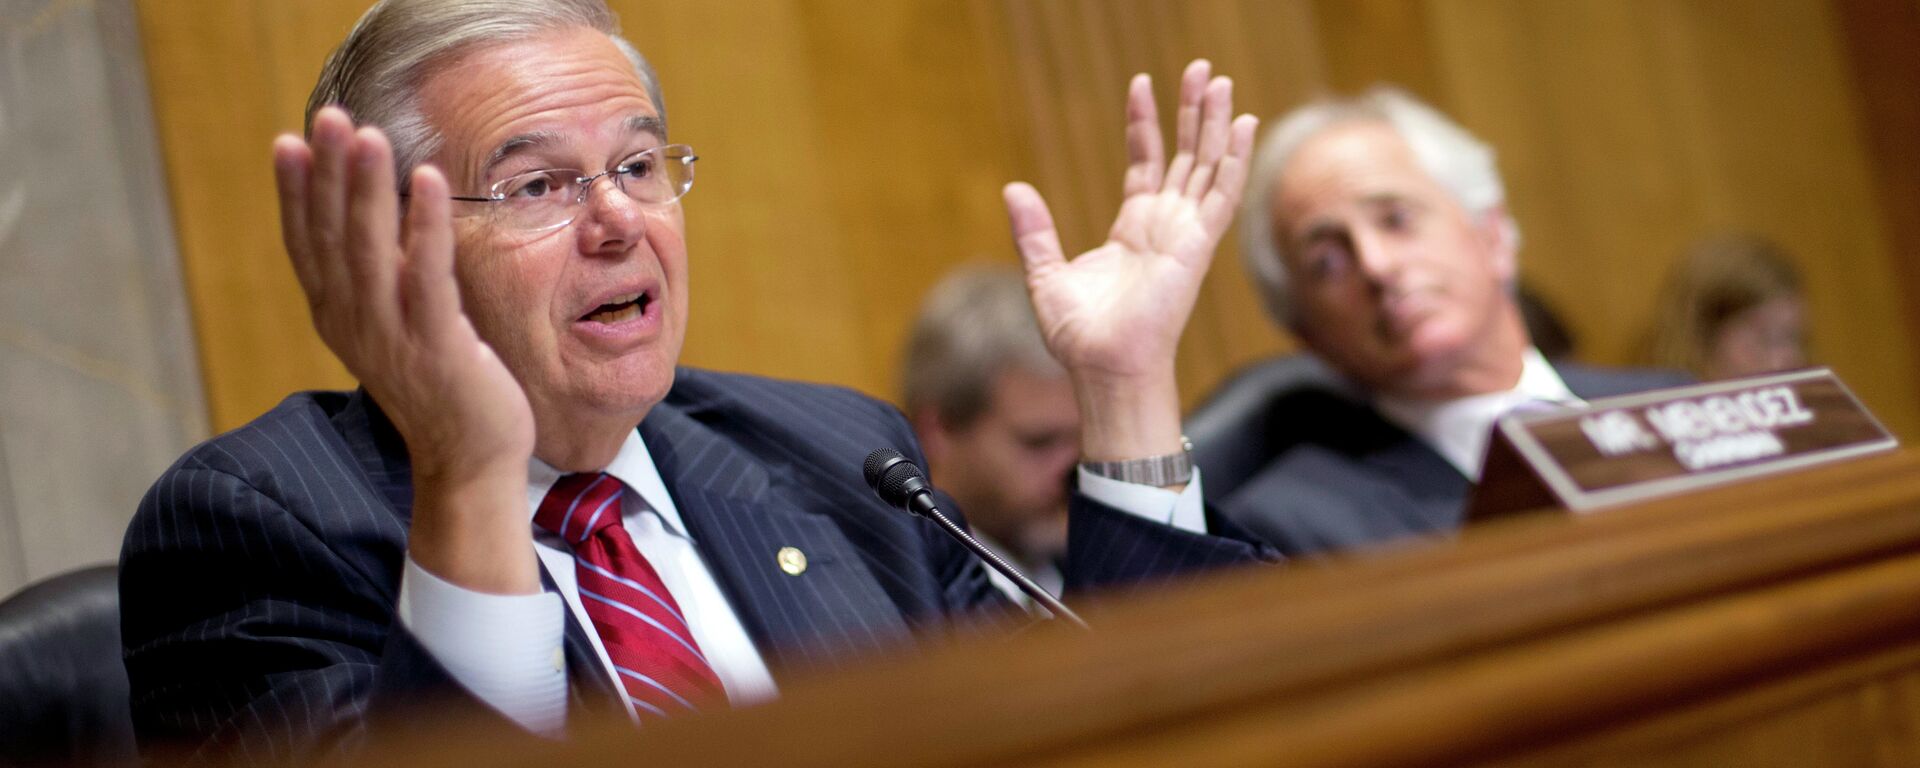 Chairman of the Senate Foreign Relations Committee, Sen. Robert Menendez, D-NJ., left, gestures as he speaks as ranking member Sen. Bob Corker, R-Tenn., sits right, during a hearing on Capitol Hill in Washington, Wednesday, July 9, 2014, to examine Russia and developments in Ukraine.  - Sputnik International, 1920, 26.10.2022